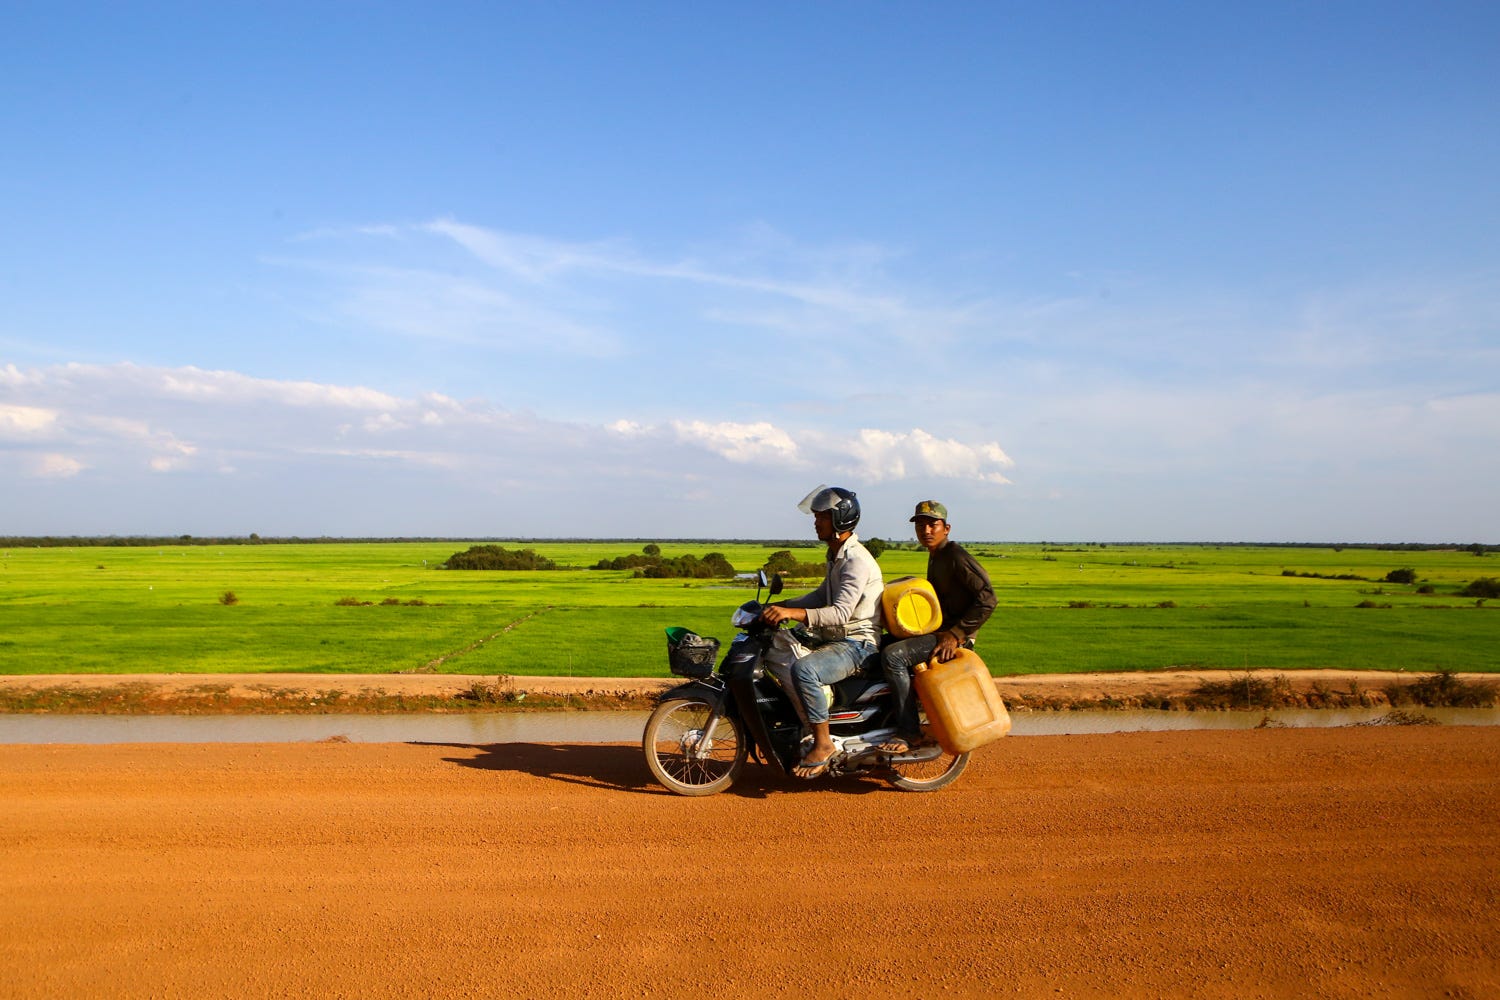 Two men are riding a motorcycle down a bright orange dirt road, one man driving and wearing a helmet and looking straight ahead. The other man is holding two gas cans and wearing a camouflaged hat and staring directly at the camera. Behind the road, green fields expand to the horizon, and the sky is a bright blue overhead.  